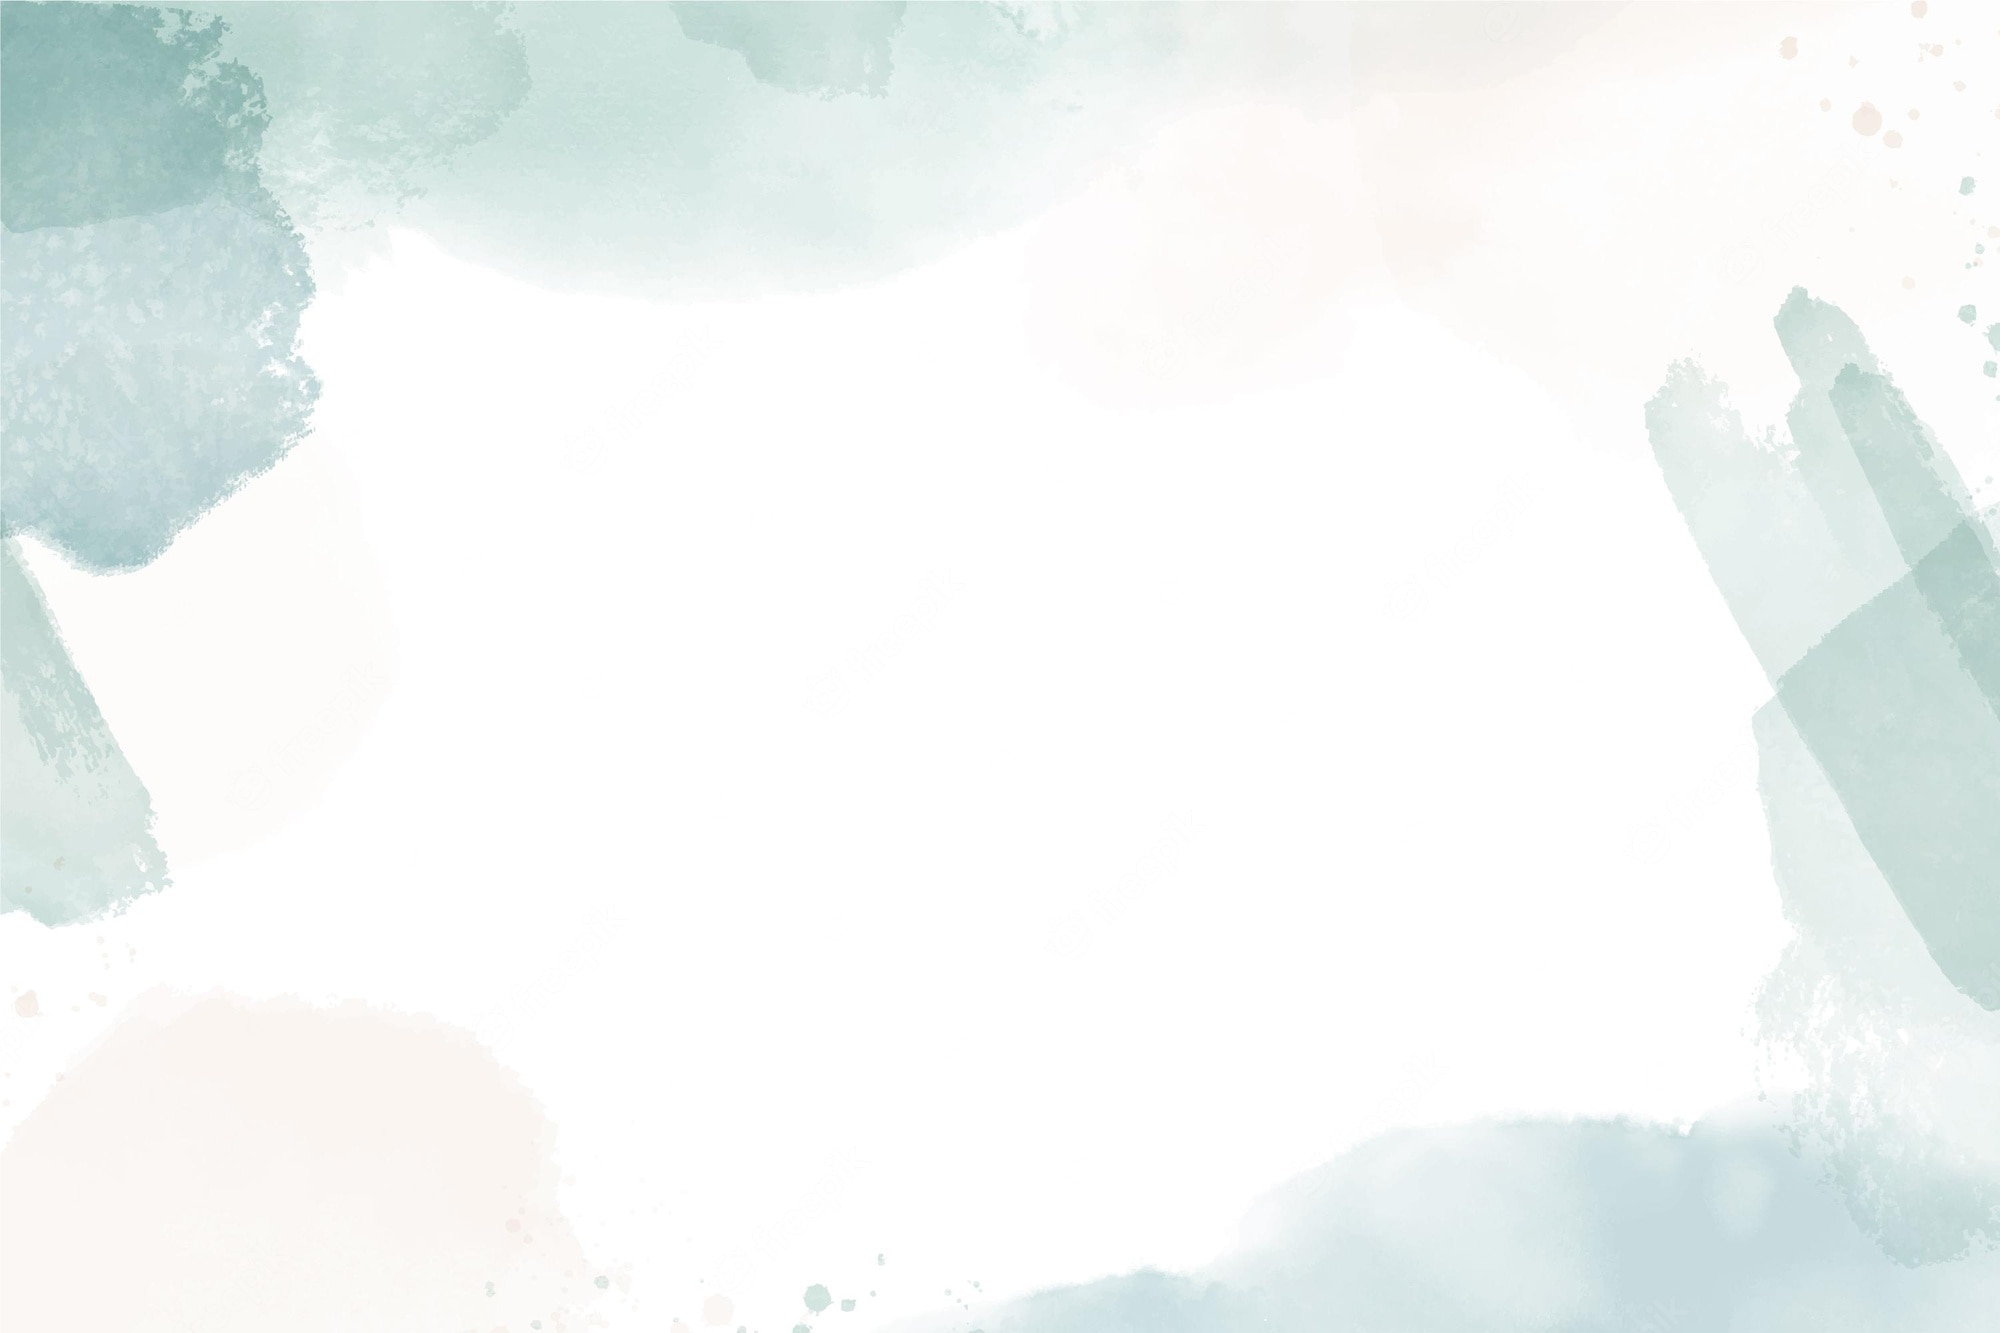 Simple Watercolor Backgrounds